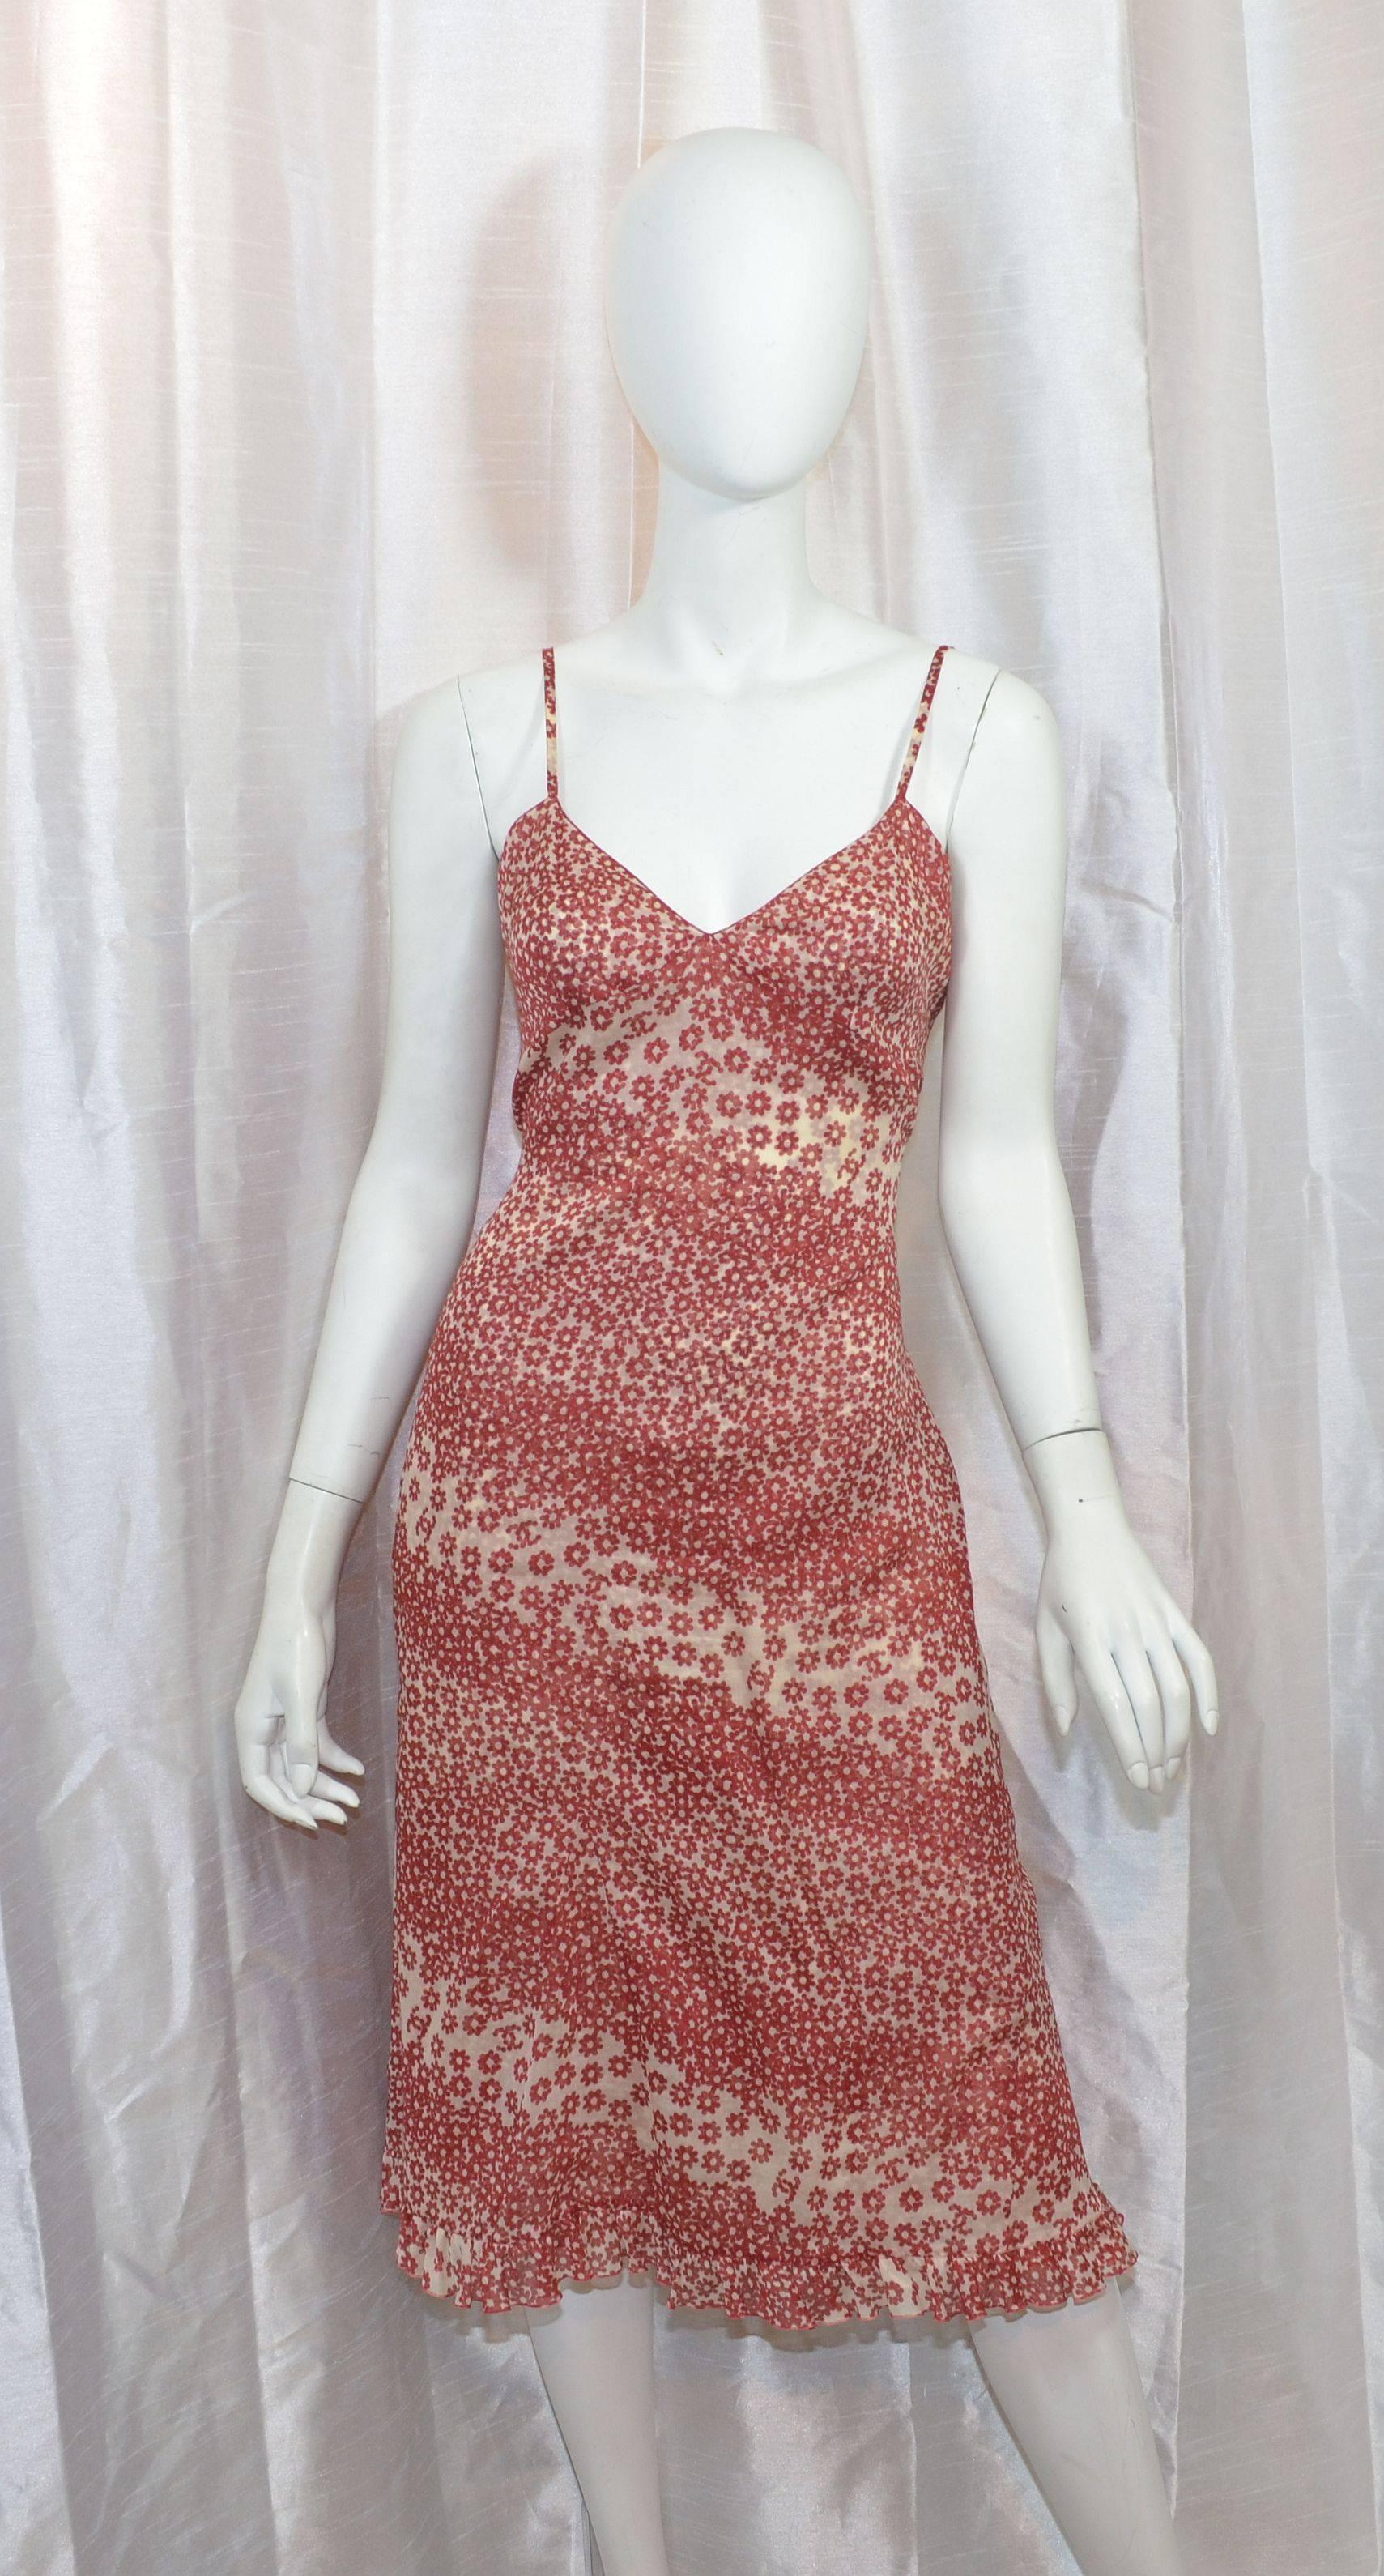 Chanel 2003 Spring collection dress set in a red and beige floral print. Dress set incudes a slip dress and a button-front duster or cover dress. Slip dress has spagetti shoulder straps, a ruffled hem, and a back zipper and hook-and-eye fastening.